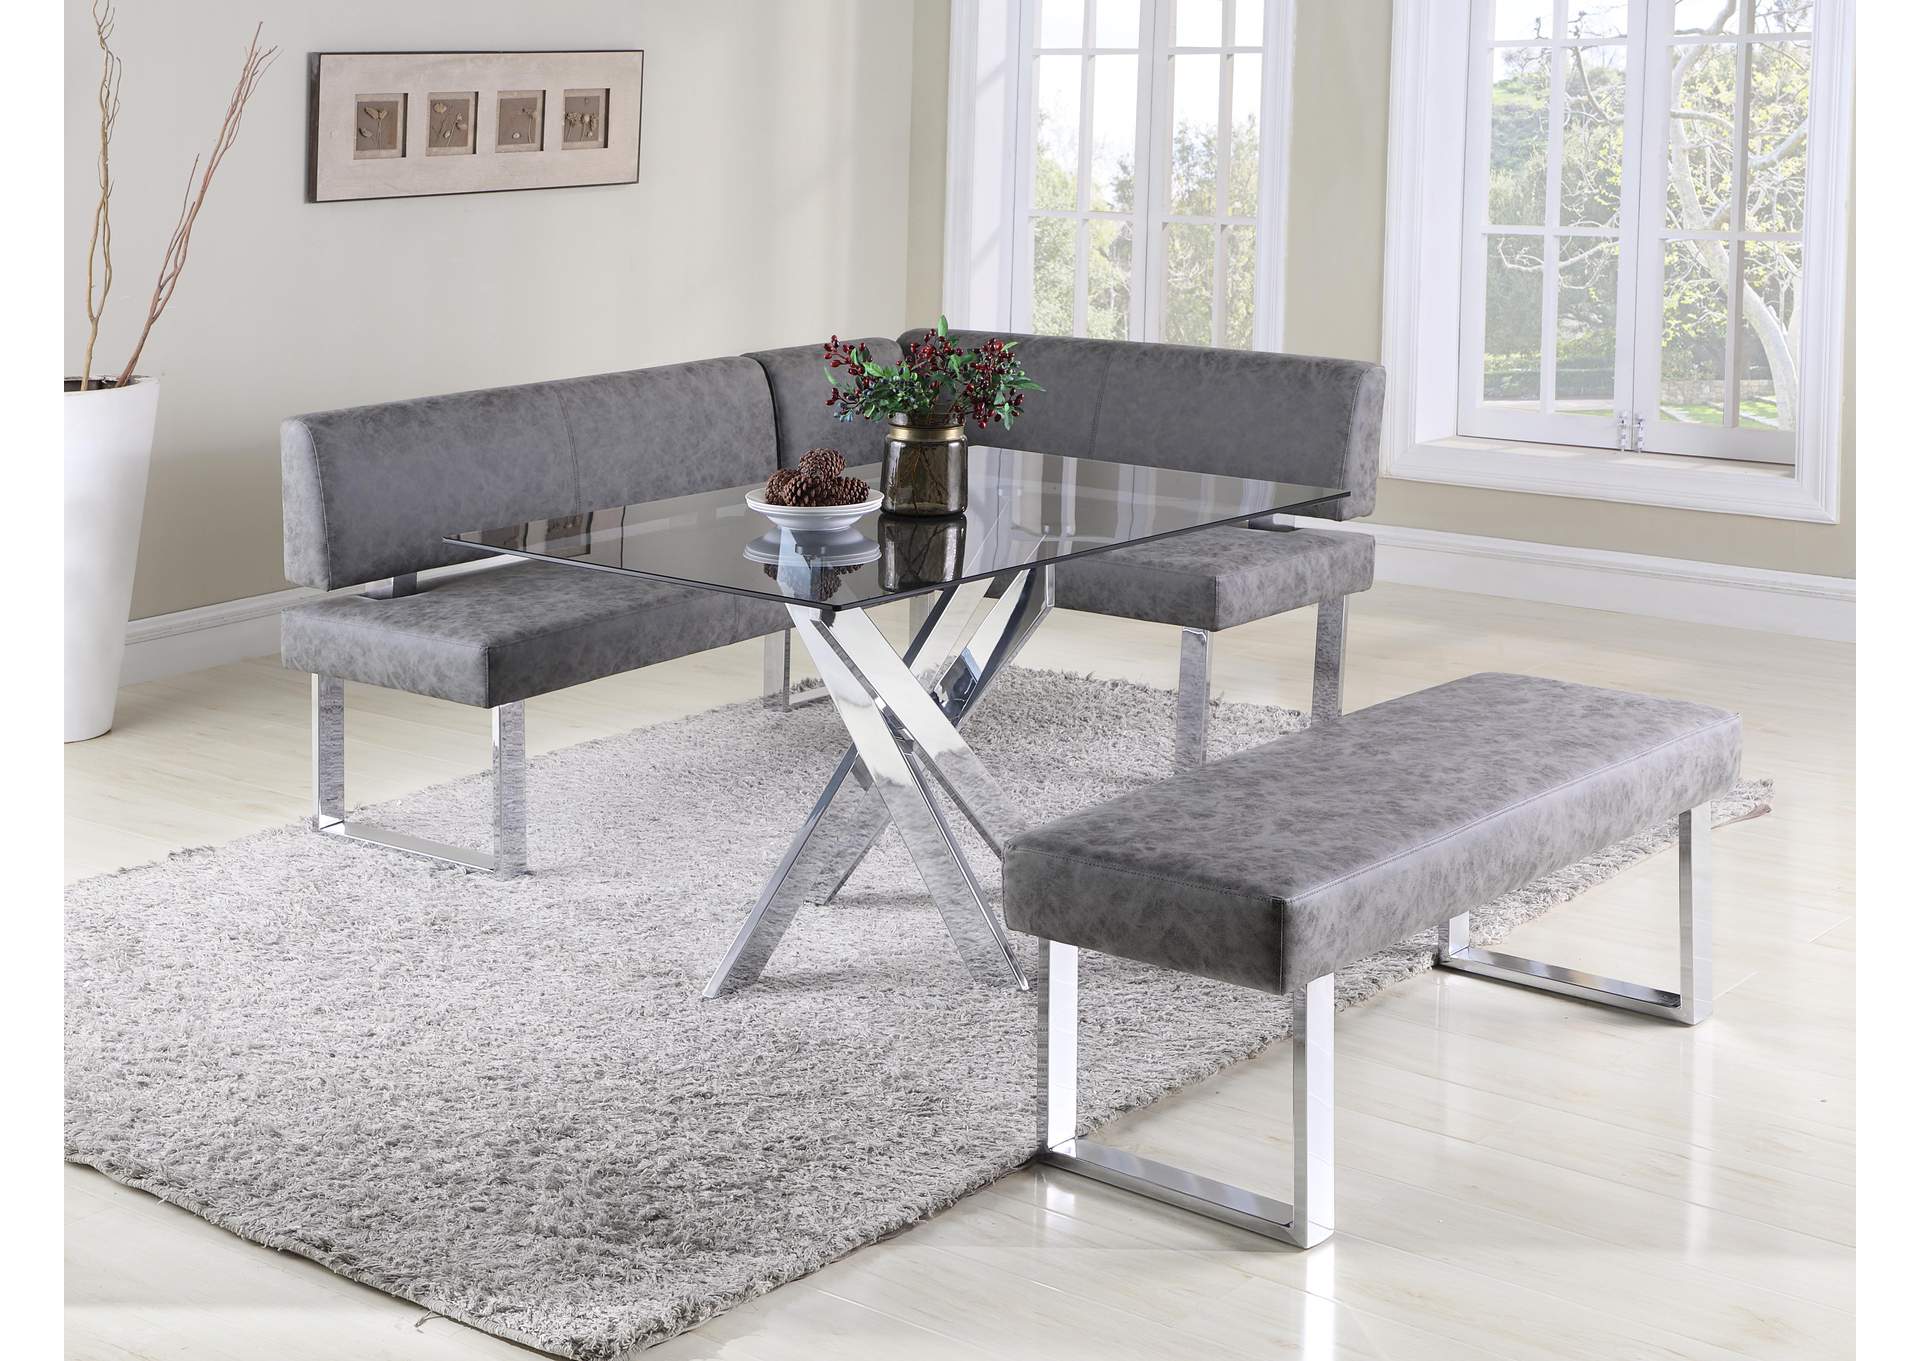 Genevieve Modern Rectangular Glass Top Dining Table,Chintaly Imports